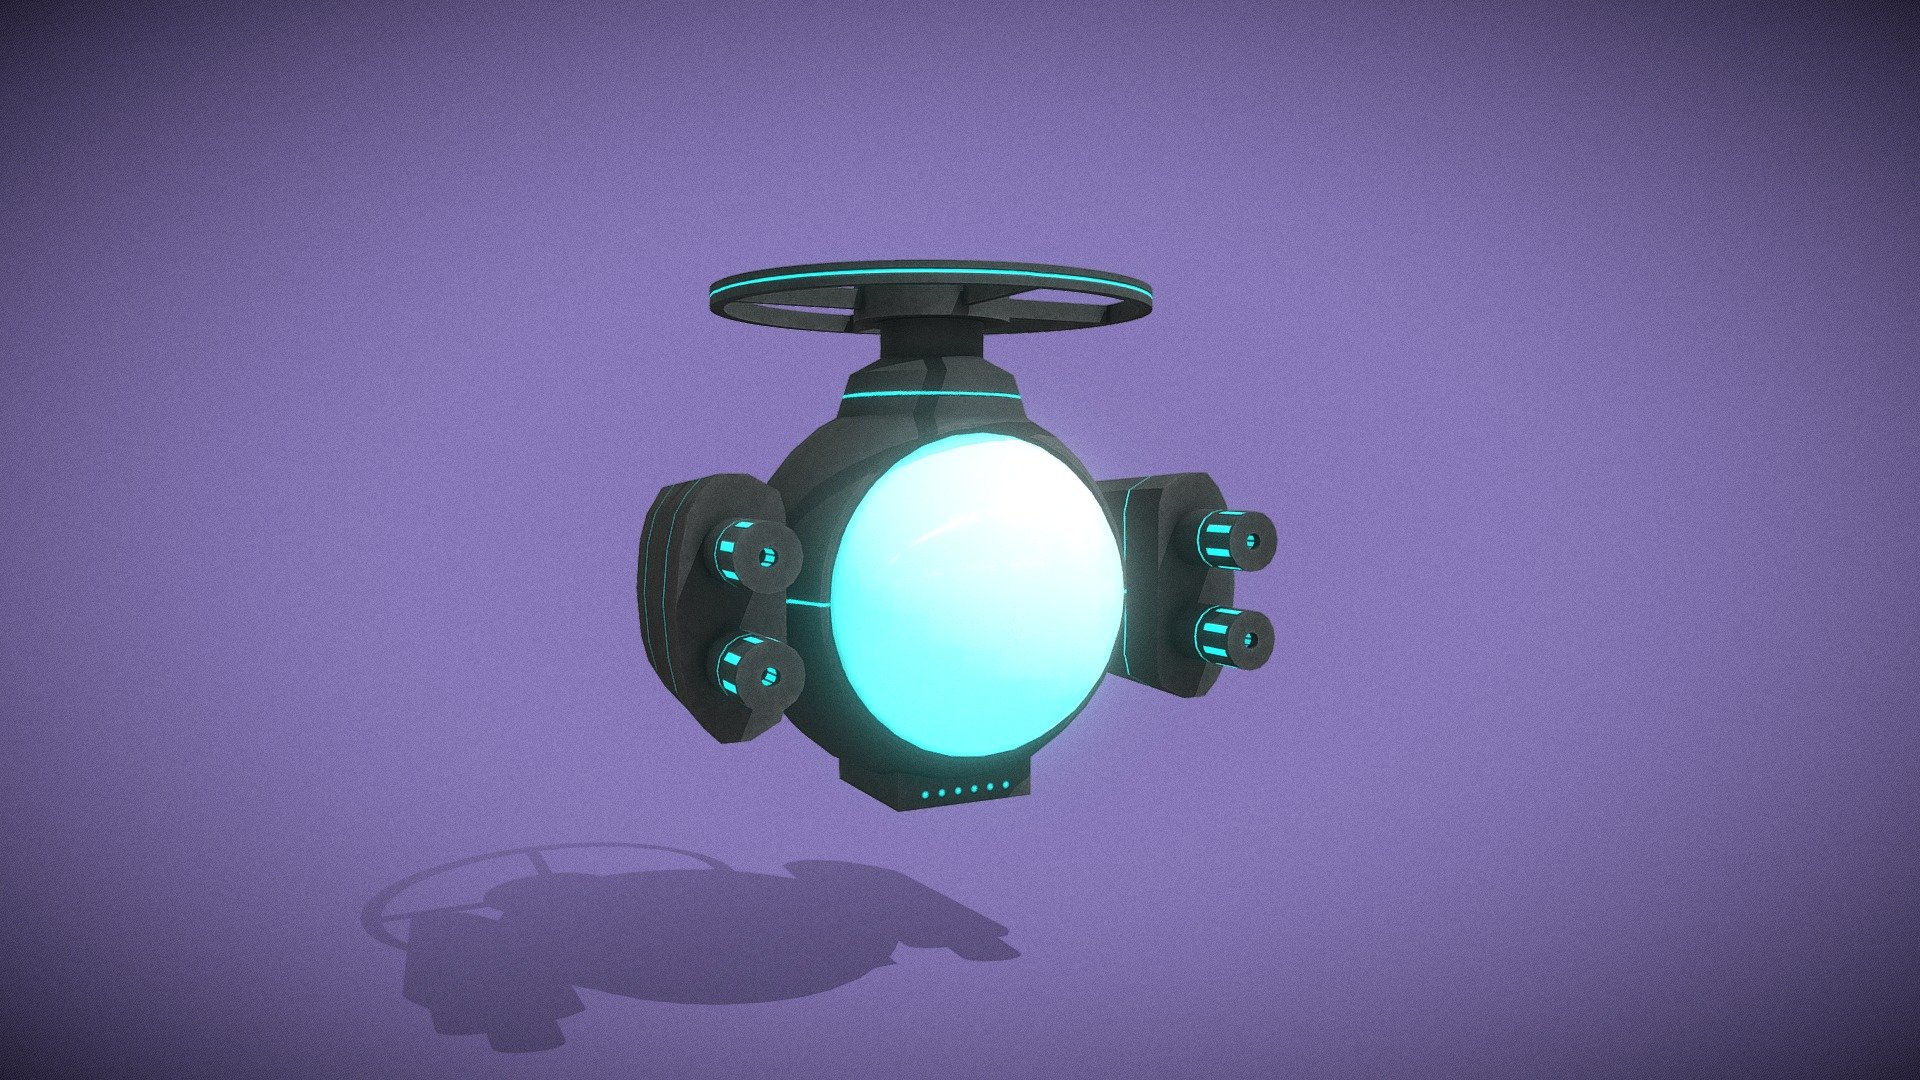 A low-poly cartoon-style flying security drone that can be used as a patrolling armed enemy in any 2D/3D environment.

Poly-count is kept as low as possible. All textures are very high quality with 2K resolution. All polygons are quads and no tris or N-Gons are used in geometry during production.
Emission-Map is used to create a glow effect in glass and body. 3 Color variations are added so the drone is available in 4 colors.
The model is rigged to include the shoot and fly animations.


Key Features :


Minimum possible poly-counts
Single Mesh &amp; Material
+3 Color Variations
Real-world scale
Only Quads(No tris or N-Gons)
Non-overlapping Unwrapped UVs
High quality 2K resolution textures
Rigged
3 Animations

Model Information :


Vertices: 1,758
Faces: 1,606
Triangles: 3,212
UV Mapped: Yes(Non-Overlapping)

Textures :


Base Color
Metallic Map
Roughness Map
MetallicSmoothness Map
Normal Map
AO Map
Emission Map

Animations :


Default
Shoot
Fly
 - Security Drone (Low Poly) - Buy Royalty Free 3D model by Game Art Universe (@gameartuniverse) 3d model